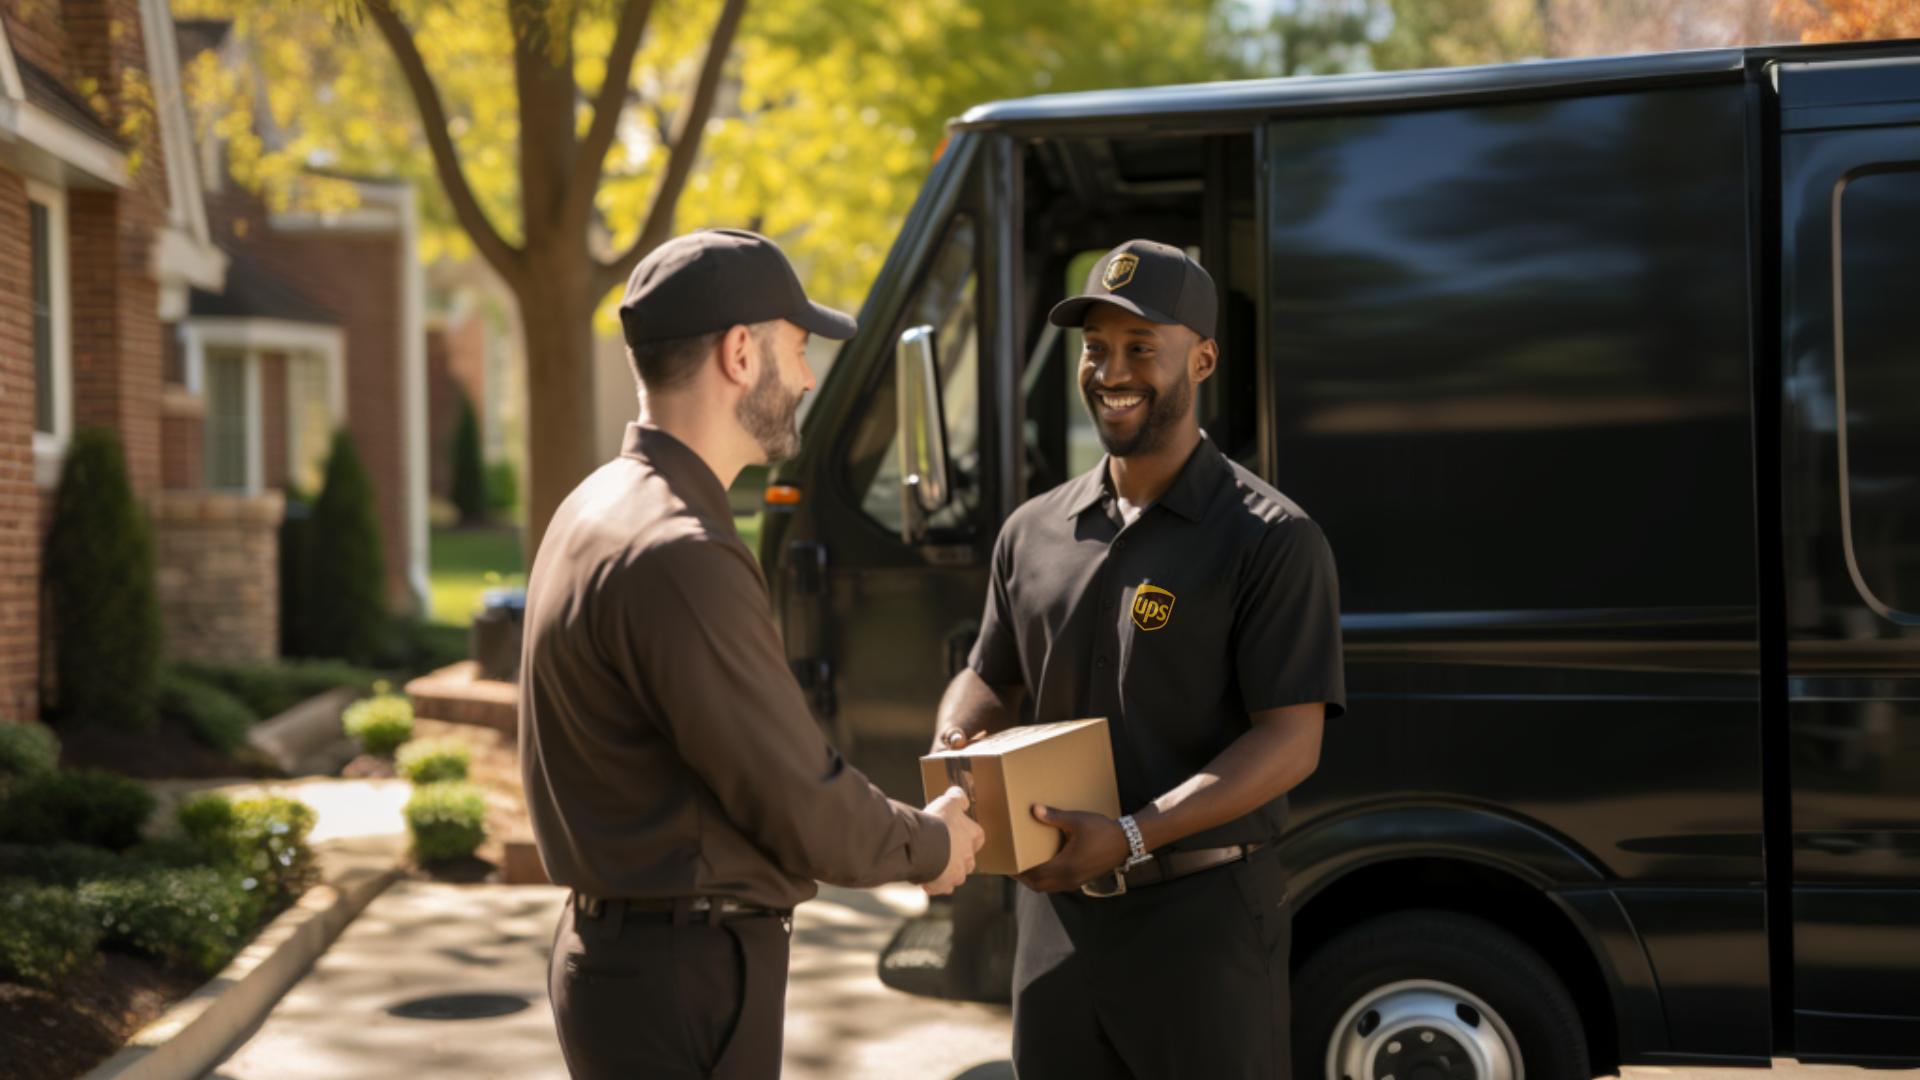 UPS employee delivering a package - Shipping Statistics UPS